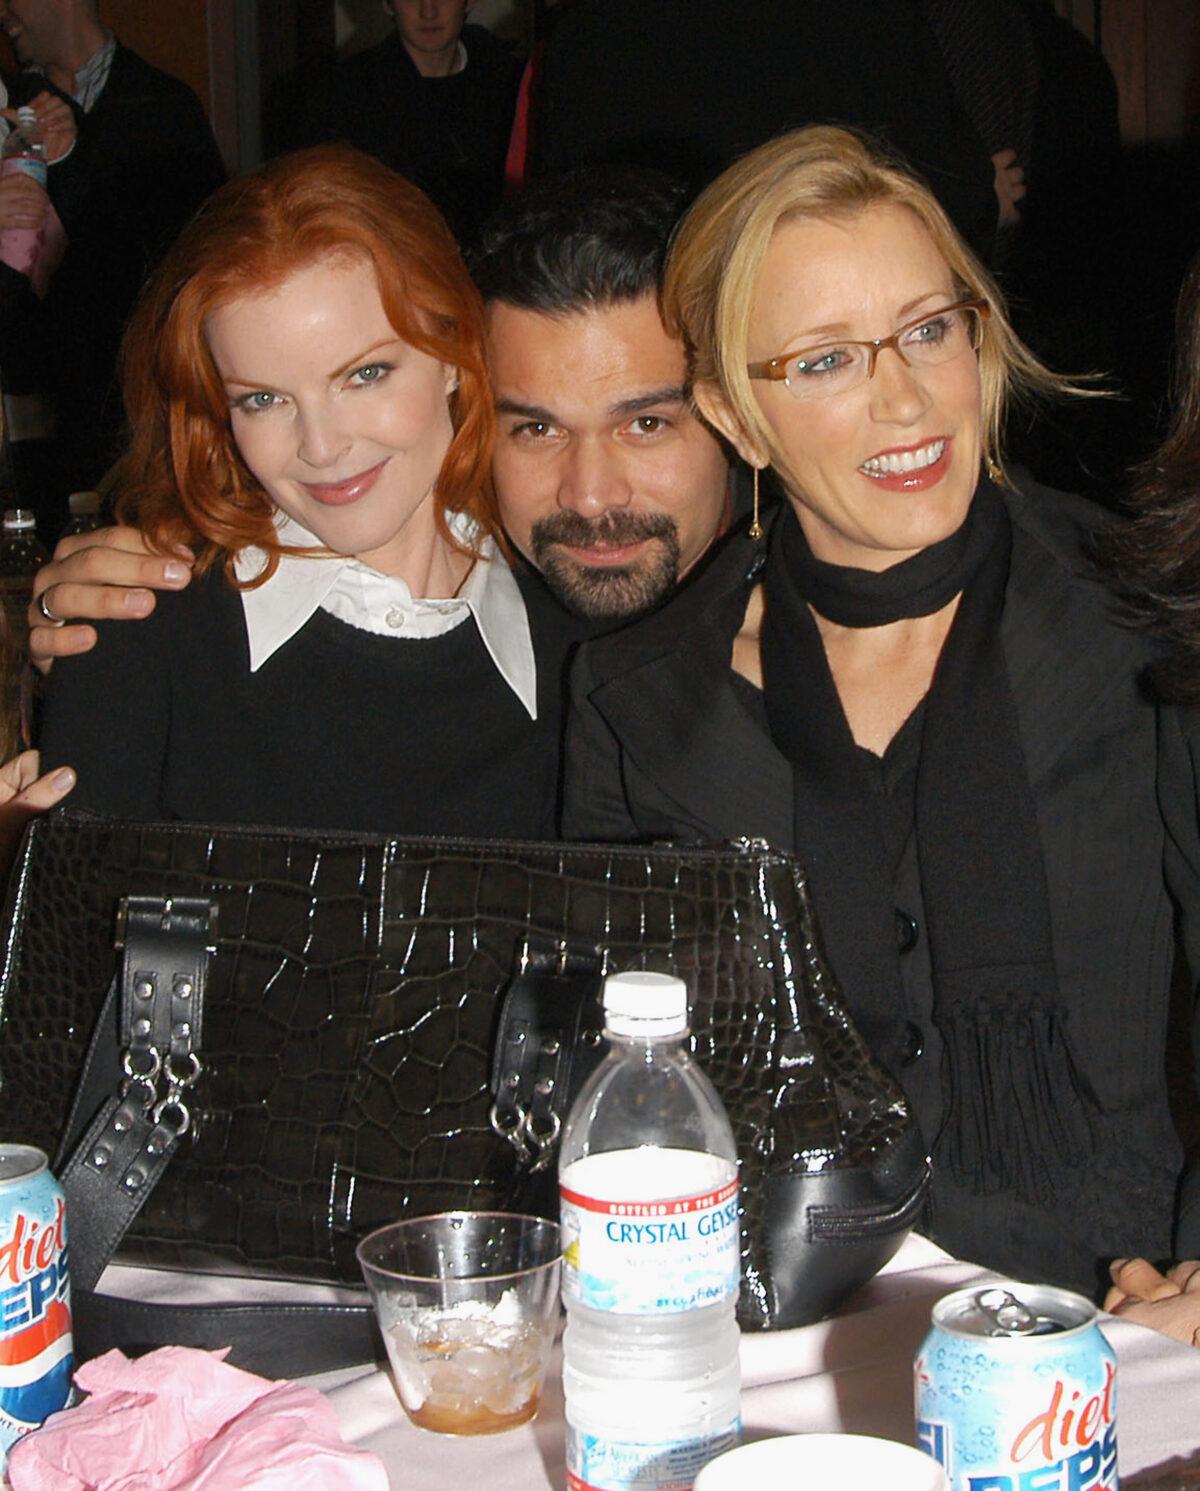 From left to right: Actors Marcia Cross, Ricardo Antonio Chavira, and Felicity Huffman pose at a "Desperate Housewives" event in a 2005 file photograph. (Stephen Shugerman/Getty Images)